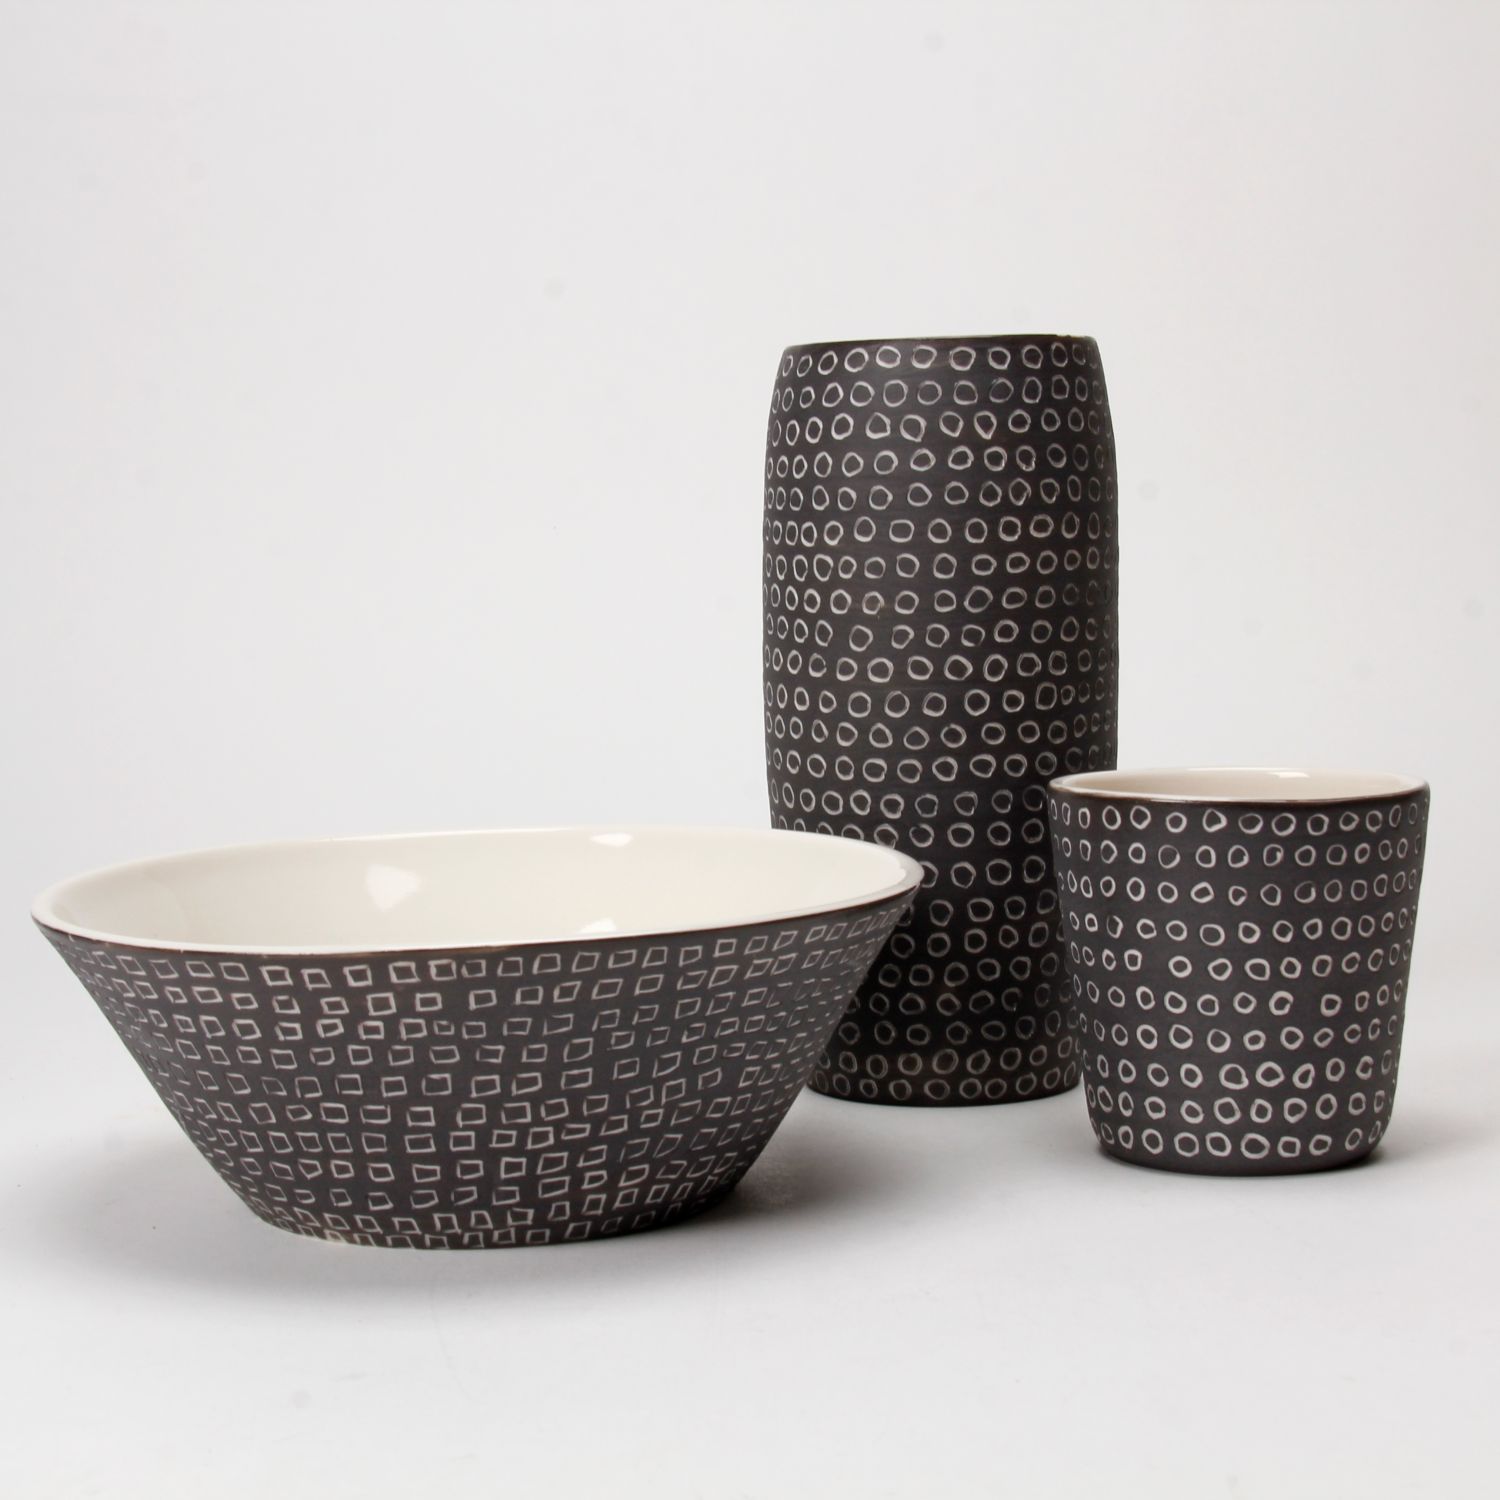 Cuir Ceramics: Black and White Bowl Product Image 3 of 5